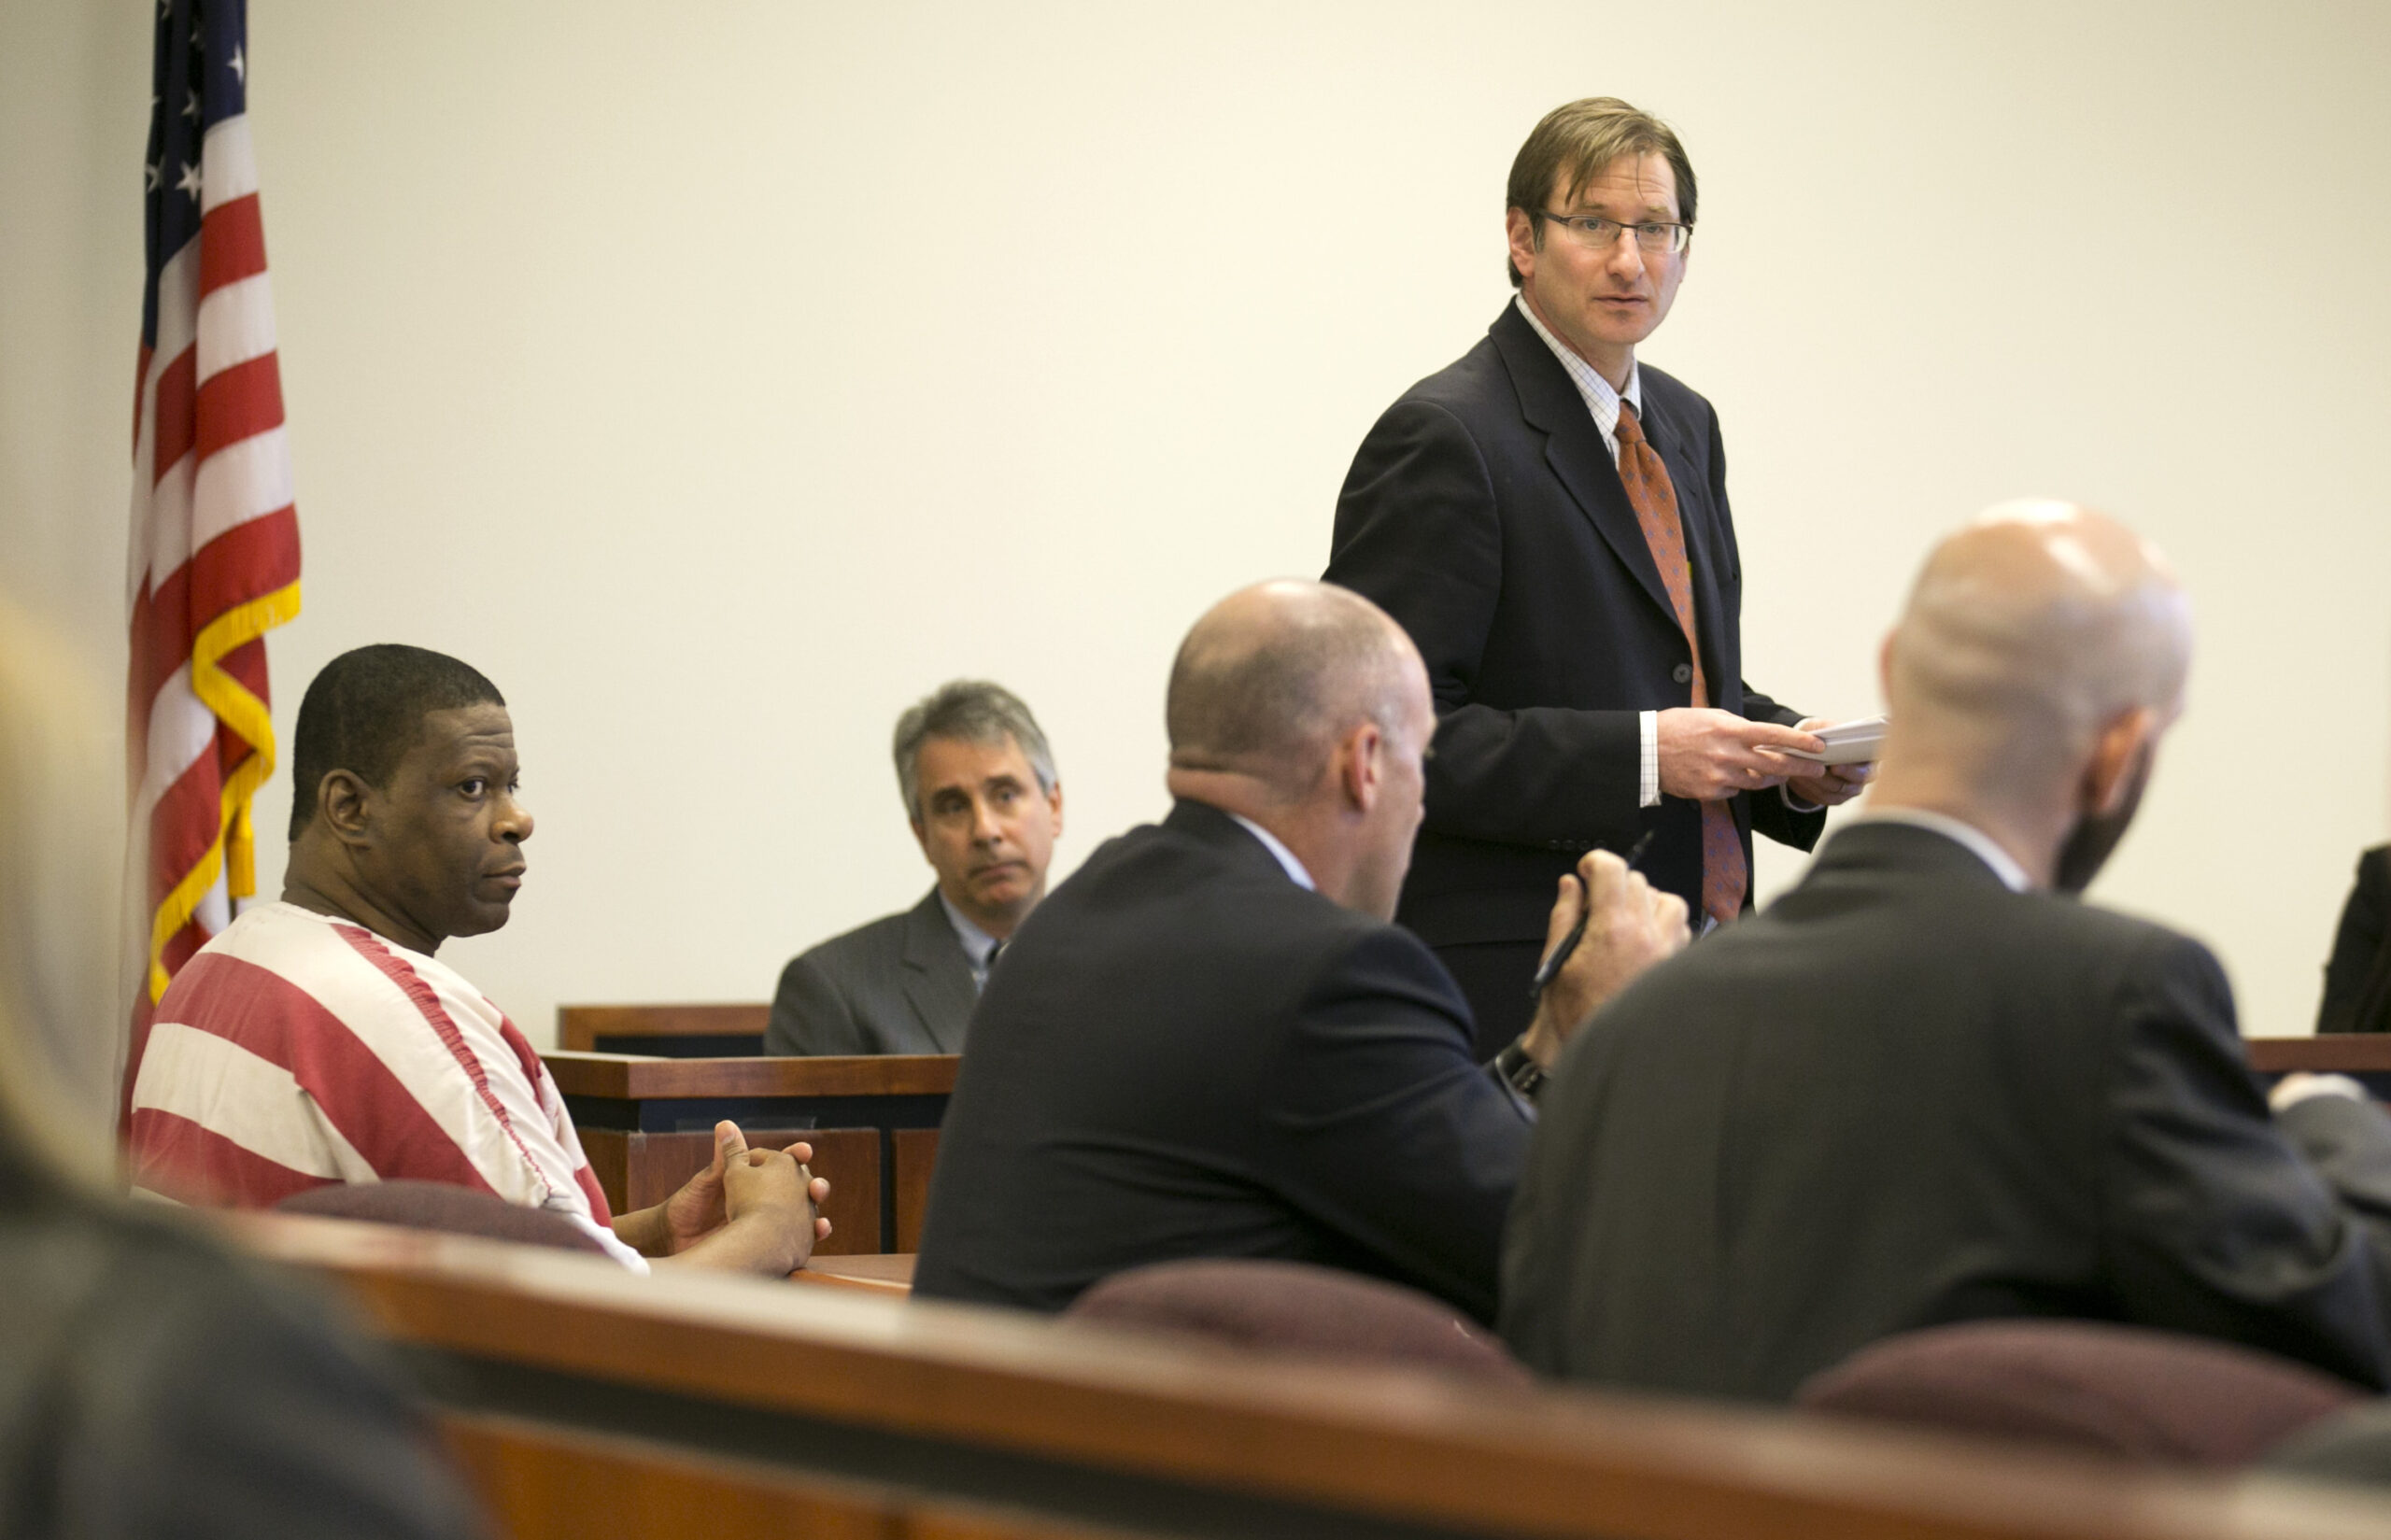 Rodney Reed, left, listens as his attorney Bryce Benjet, standing at right, speaks at a hearing at the Bastrop County Criminal Justice Center in Bastrop on Tuesday November 25, 2014.  (Jay Janner/Austin American-Statesman via AP)